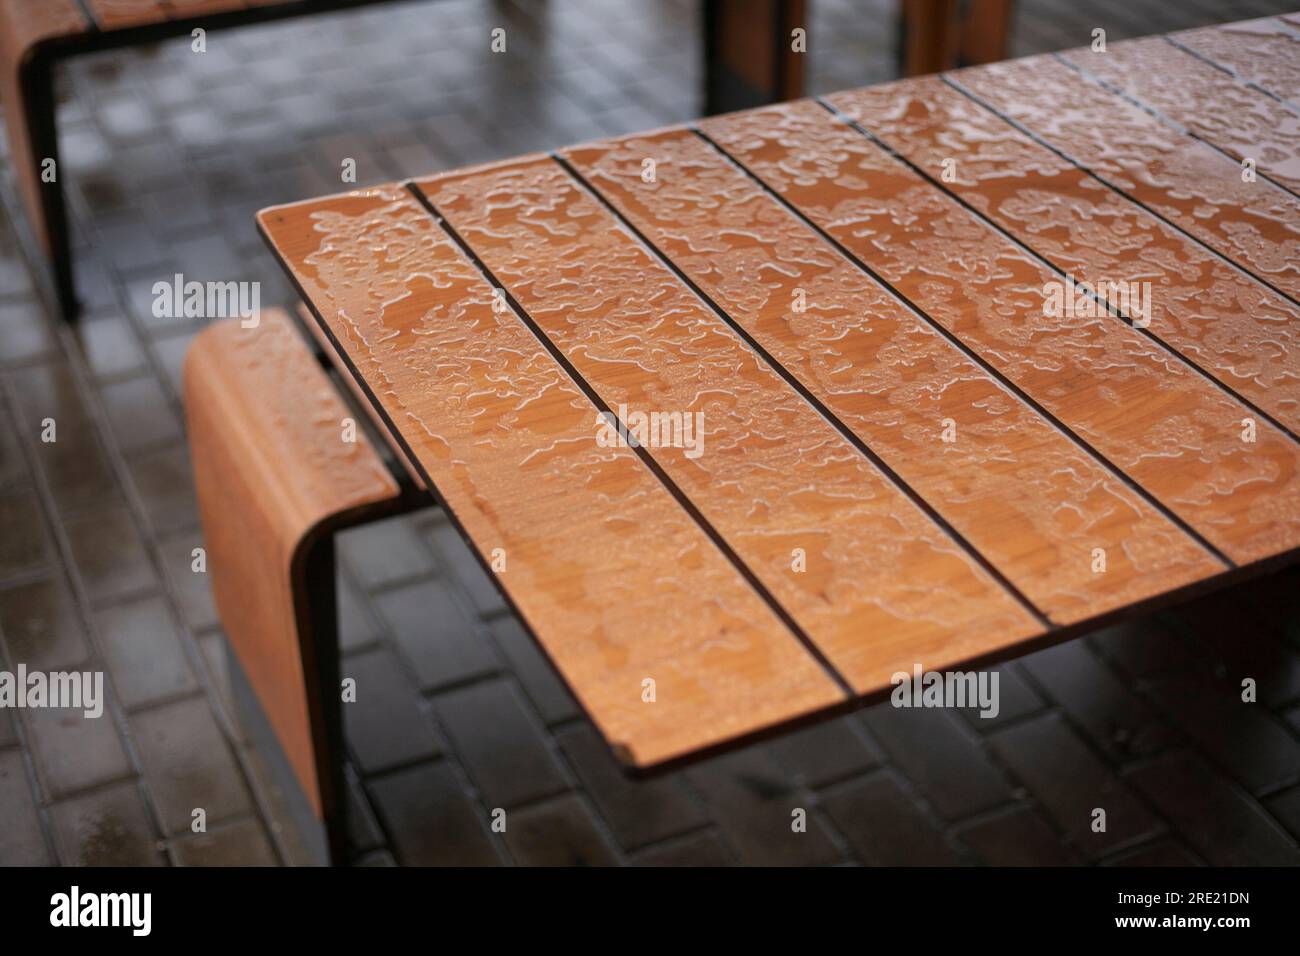 Wet table. Rain outside. Place to eat. Water on table. Stock Photo